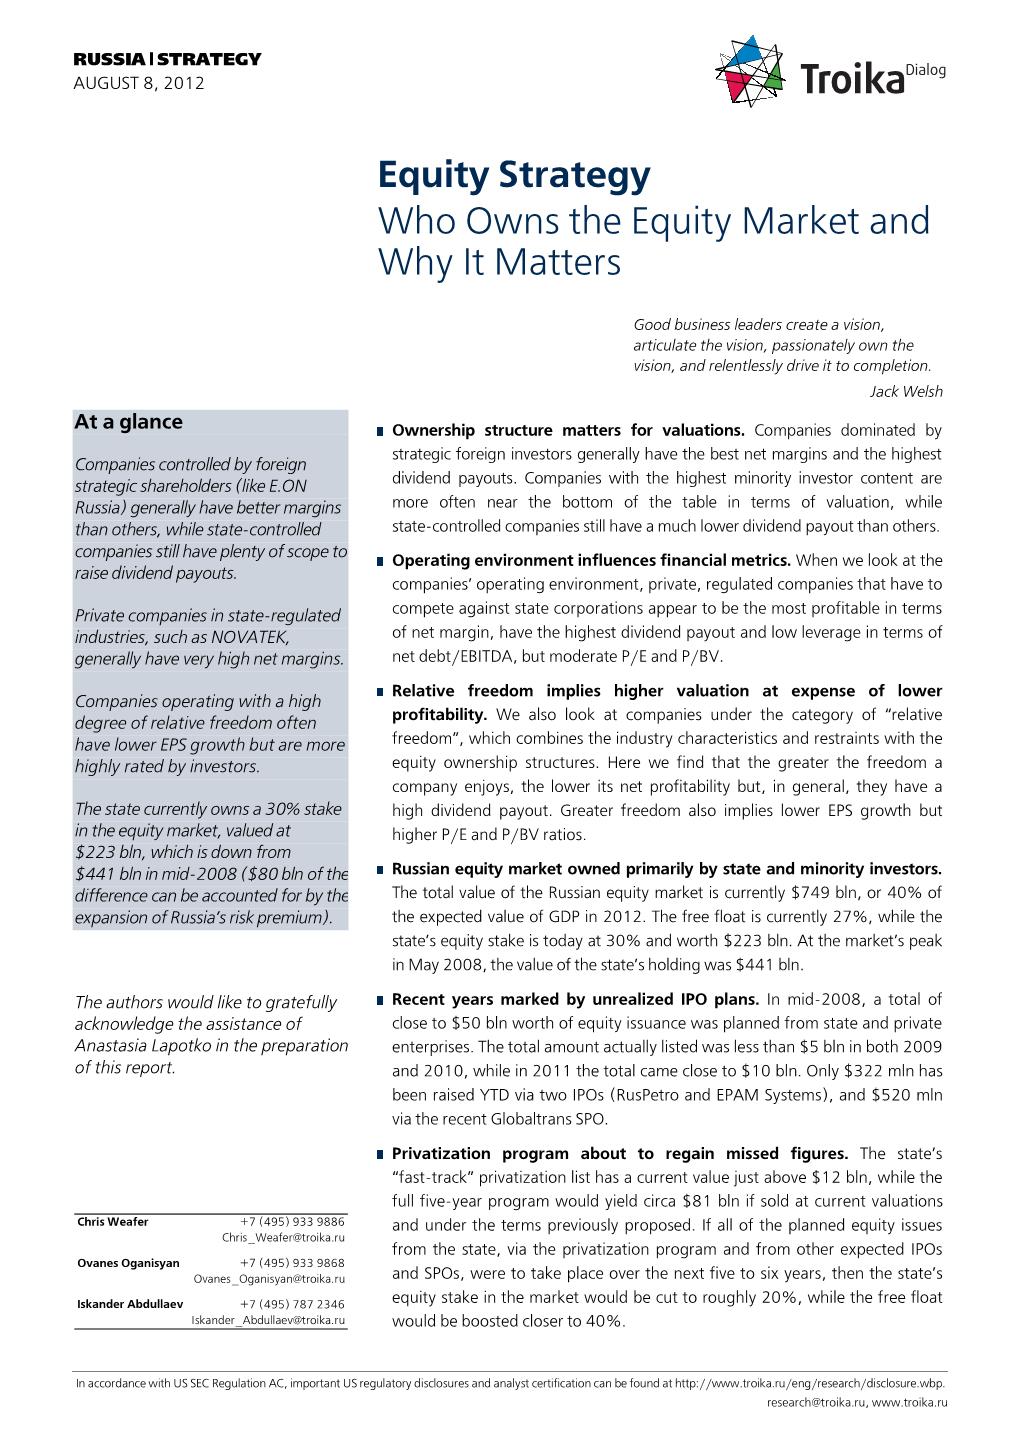 Equity Strategy Who Owns the Equity Market And